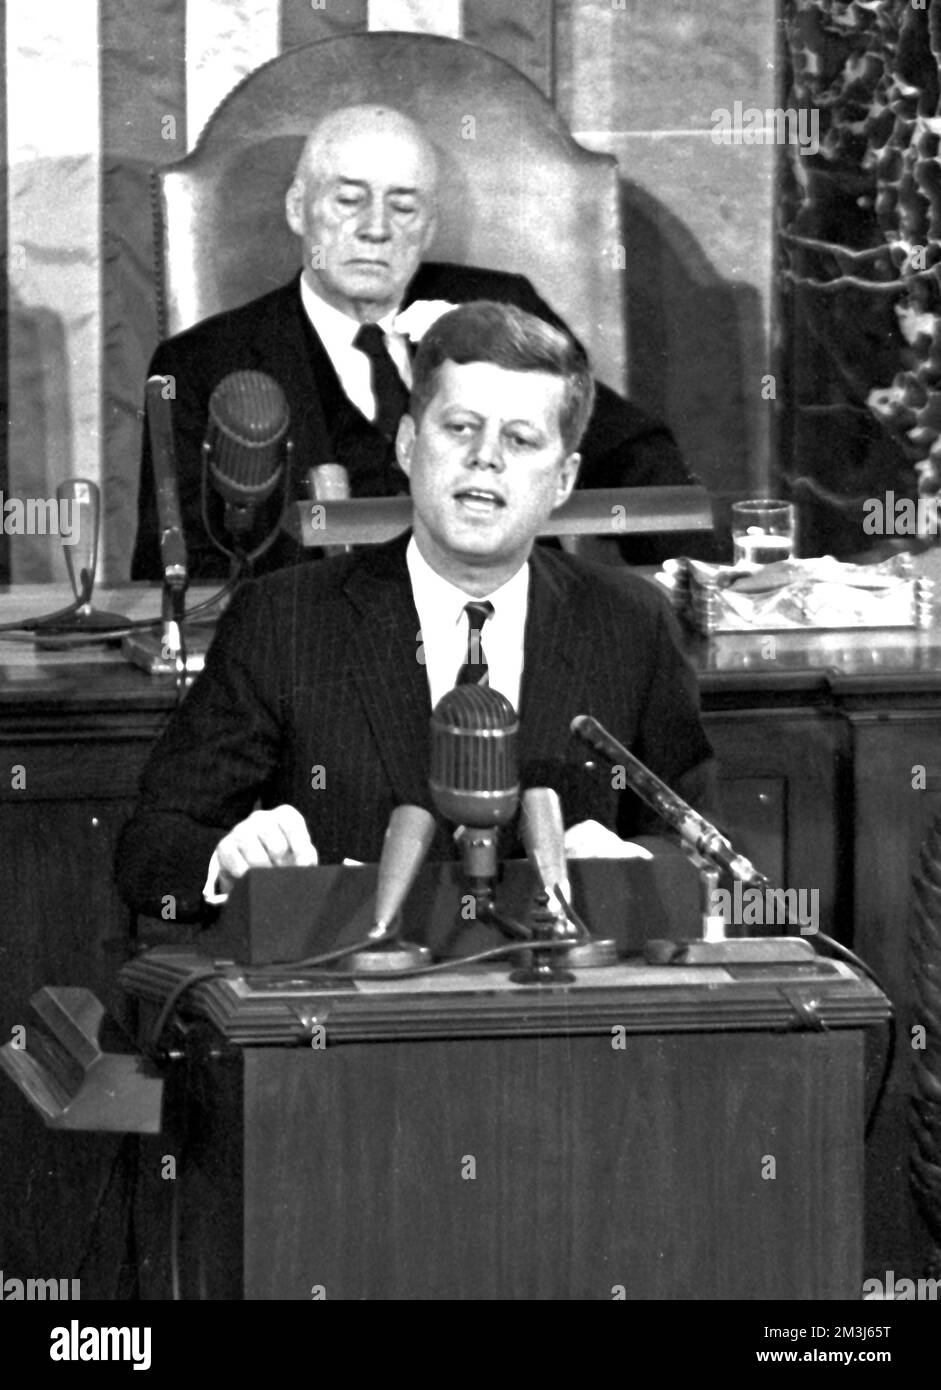 **FILE PHOTO** National Archives release classified JFK assassination files. United States President John F. Kennedy outlined his vision for manned exploration of space to a Joint Session of the United States Congress, in Washington, DC on May 25, 1961 when he declared, '.I believe this nation should commit itself to achieving the goal, before this decade is out, of landing a man on the Moon and returning him safely to the Earth.' This goal was achieved when astronaut Neil A. Armstrong became the first human to set foot upon the Moon at 10:56 p.m. EDT, July 20, 1969. Shown in the backgroun Stock Photo